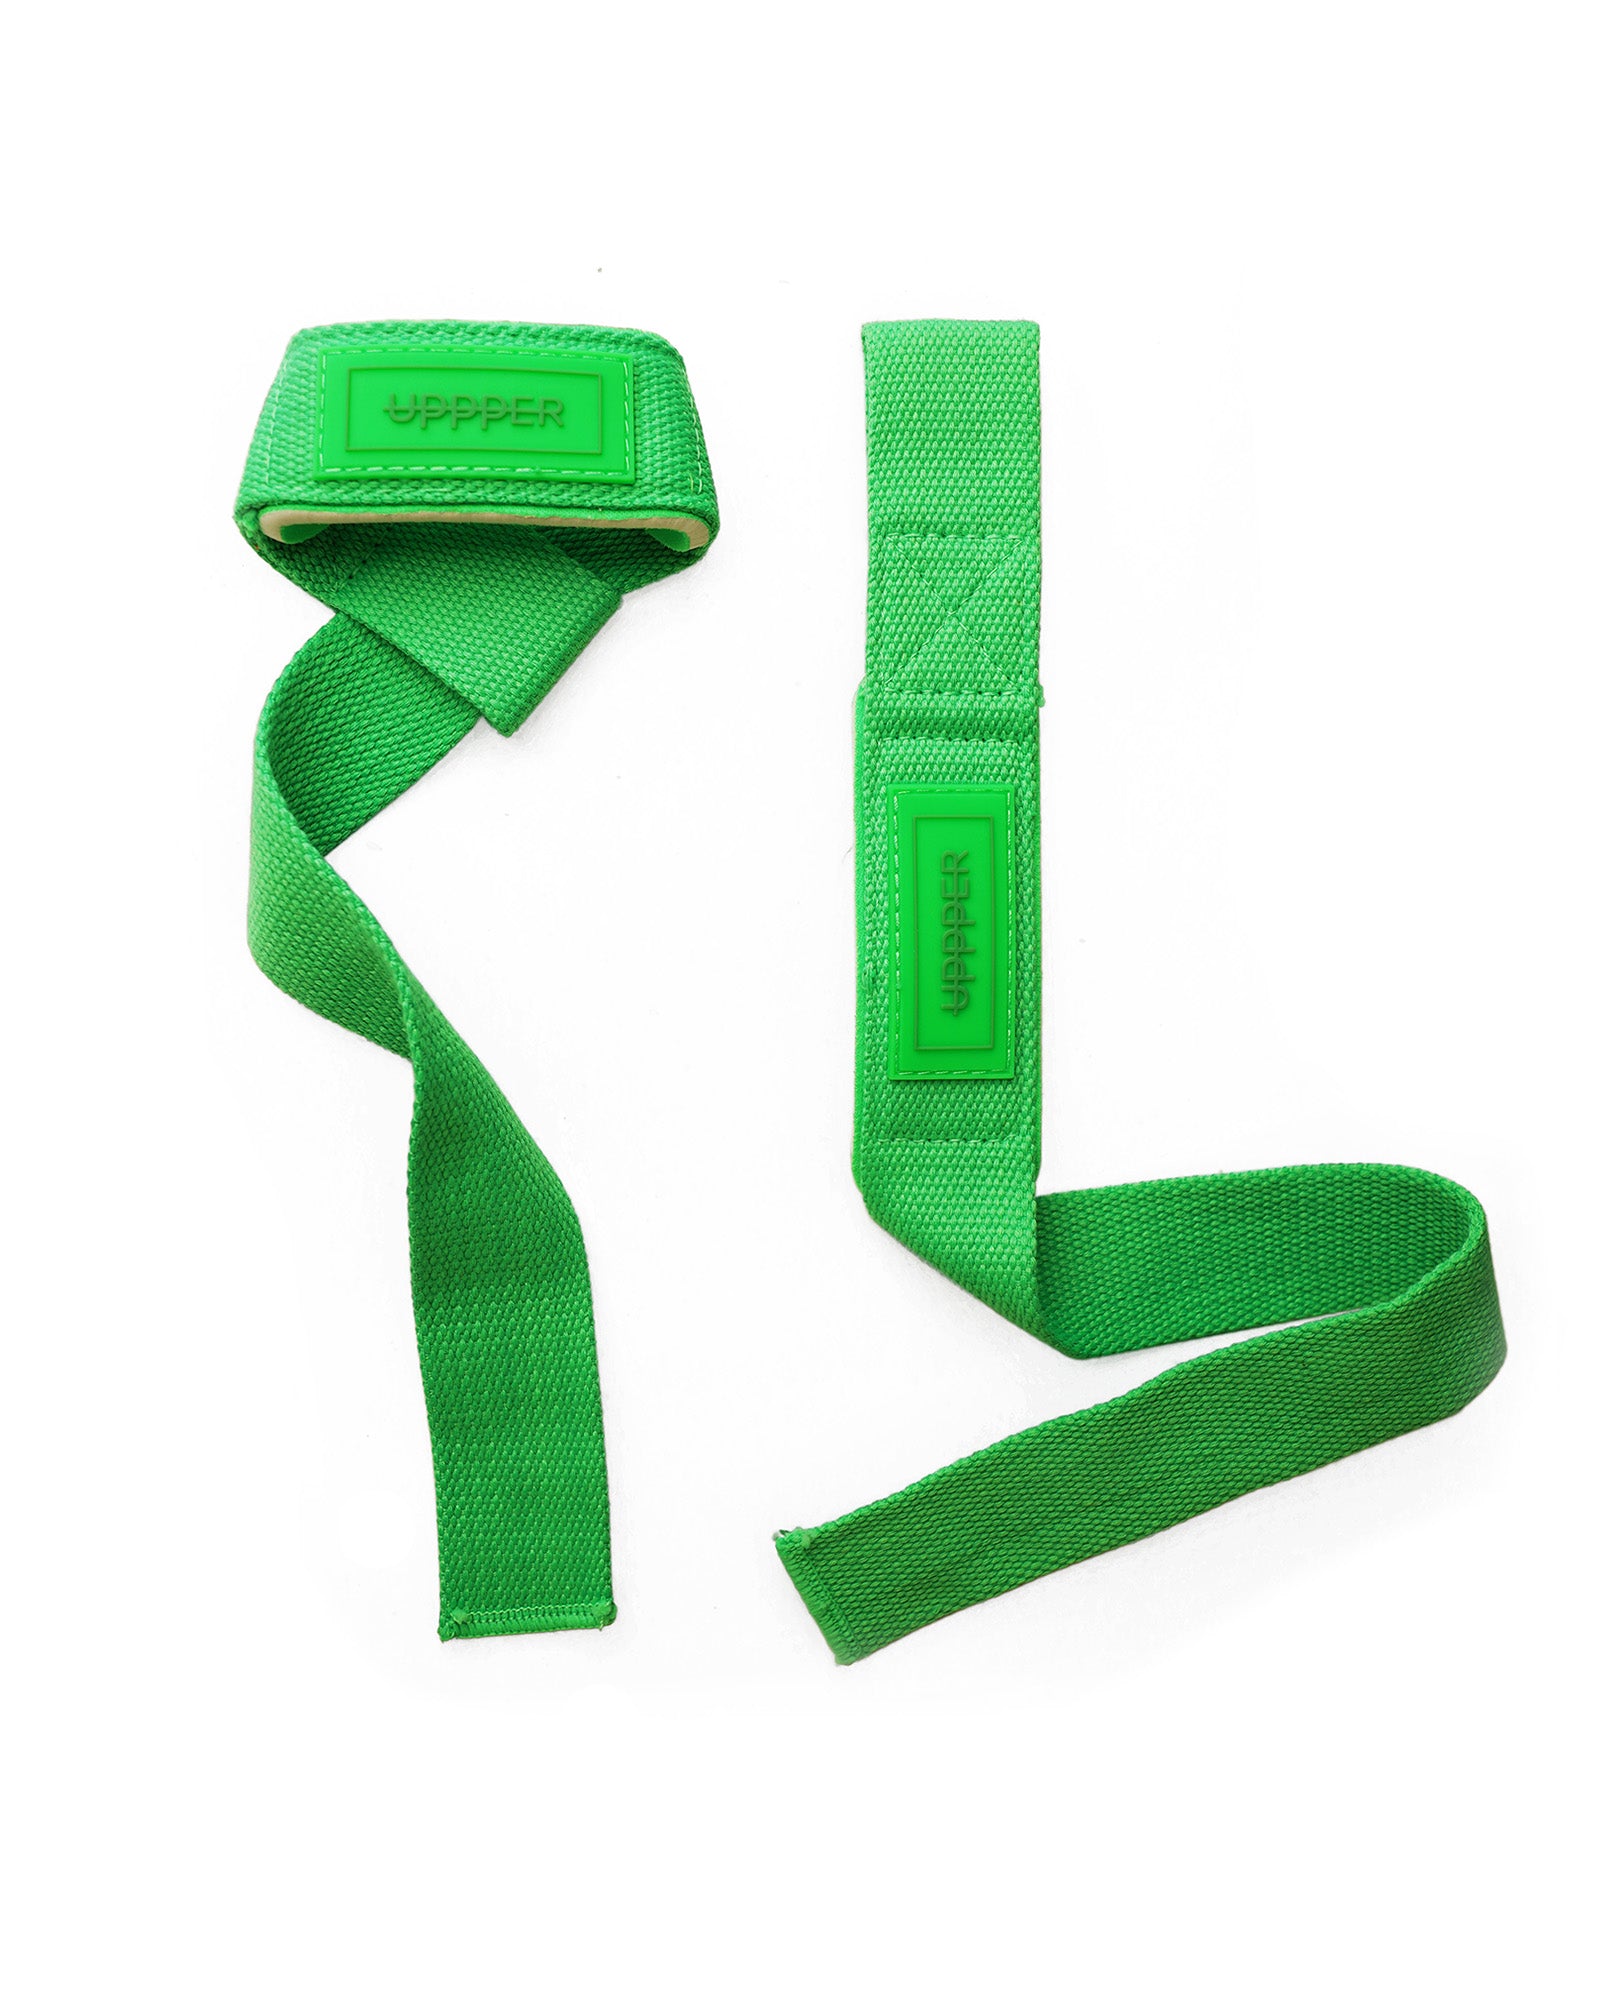 uppper lifting straps neon green